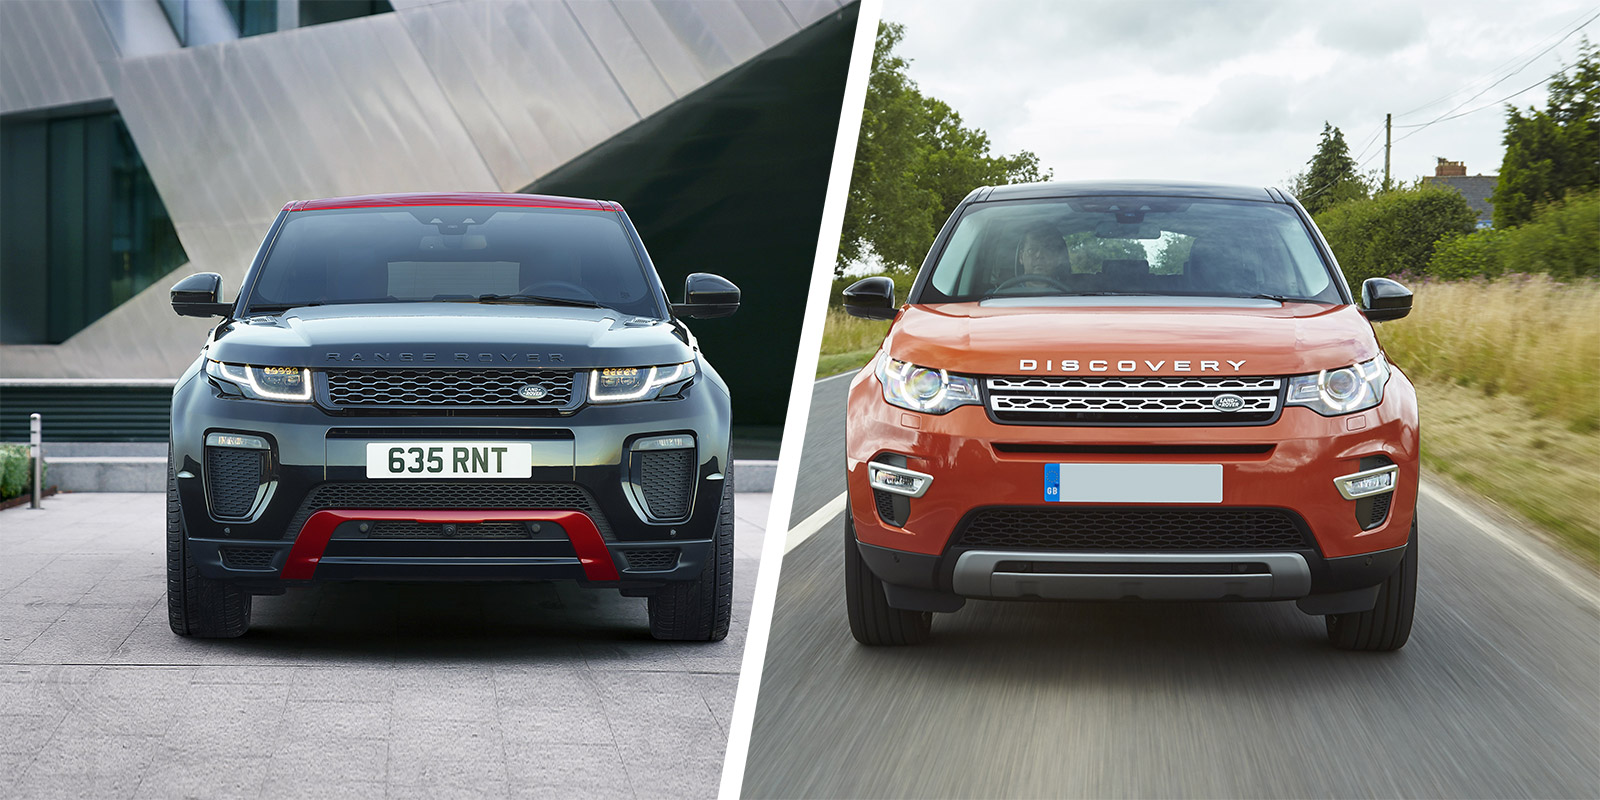 Land Rover Vs. Range Rover What’s the Difference? Trust Auto